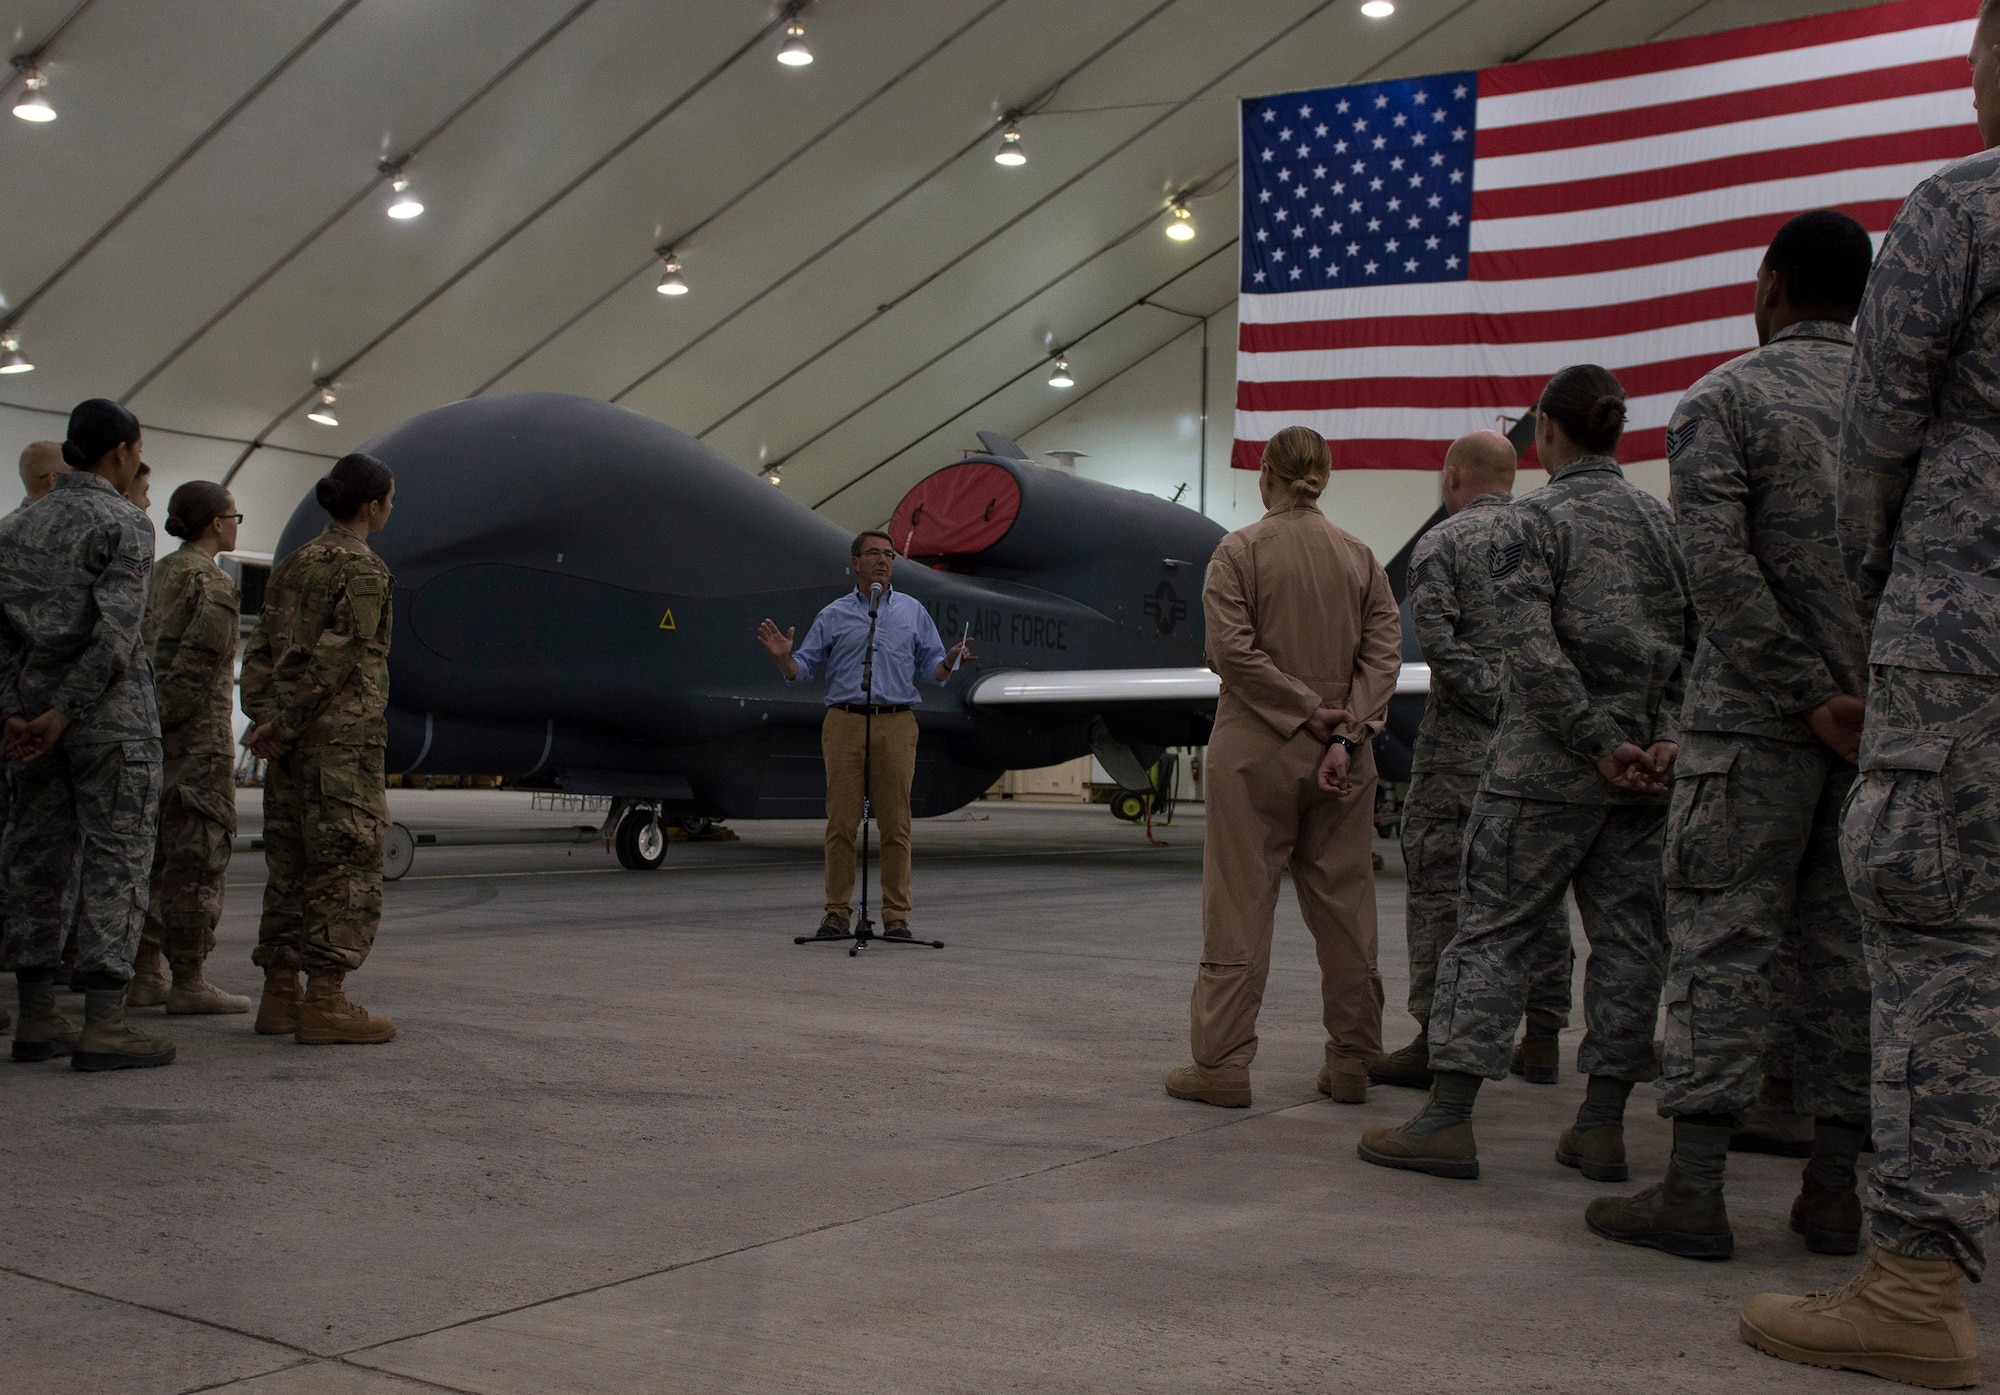 U.S. Secretary of Defense Ash Carter speaks to U.S. and coalition forces at an undisclosed location in Southwest Asia, April 16, 2016. Secretary Carter spoke with the service members about the importance of their role in accelerating the lasting defeat of ISIL. (U.S. Air Force photo by Staff Sgt. Chad Warren)